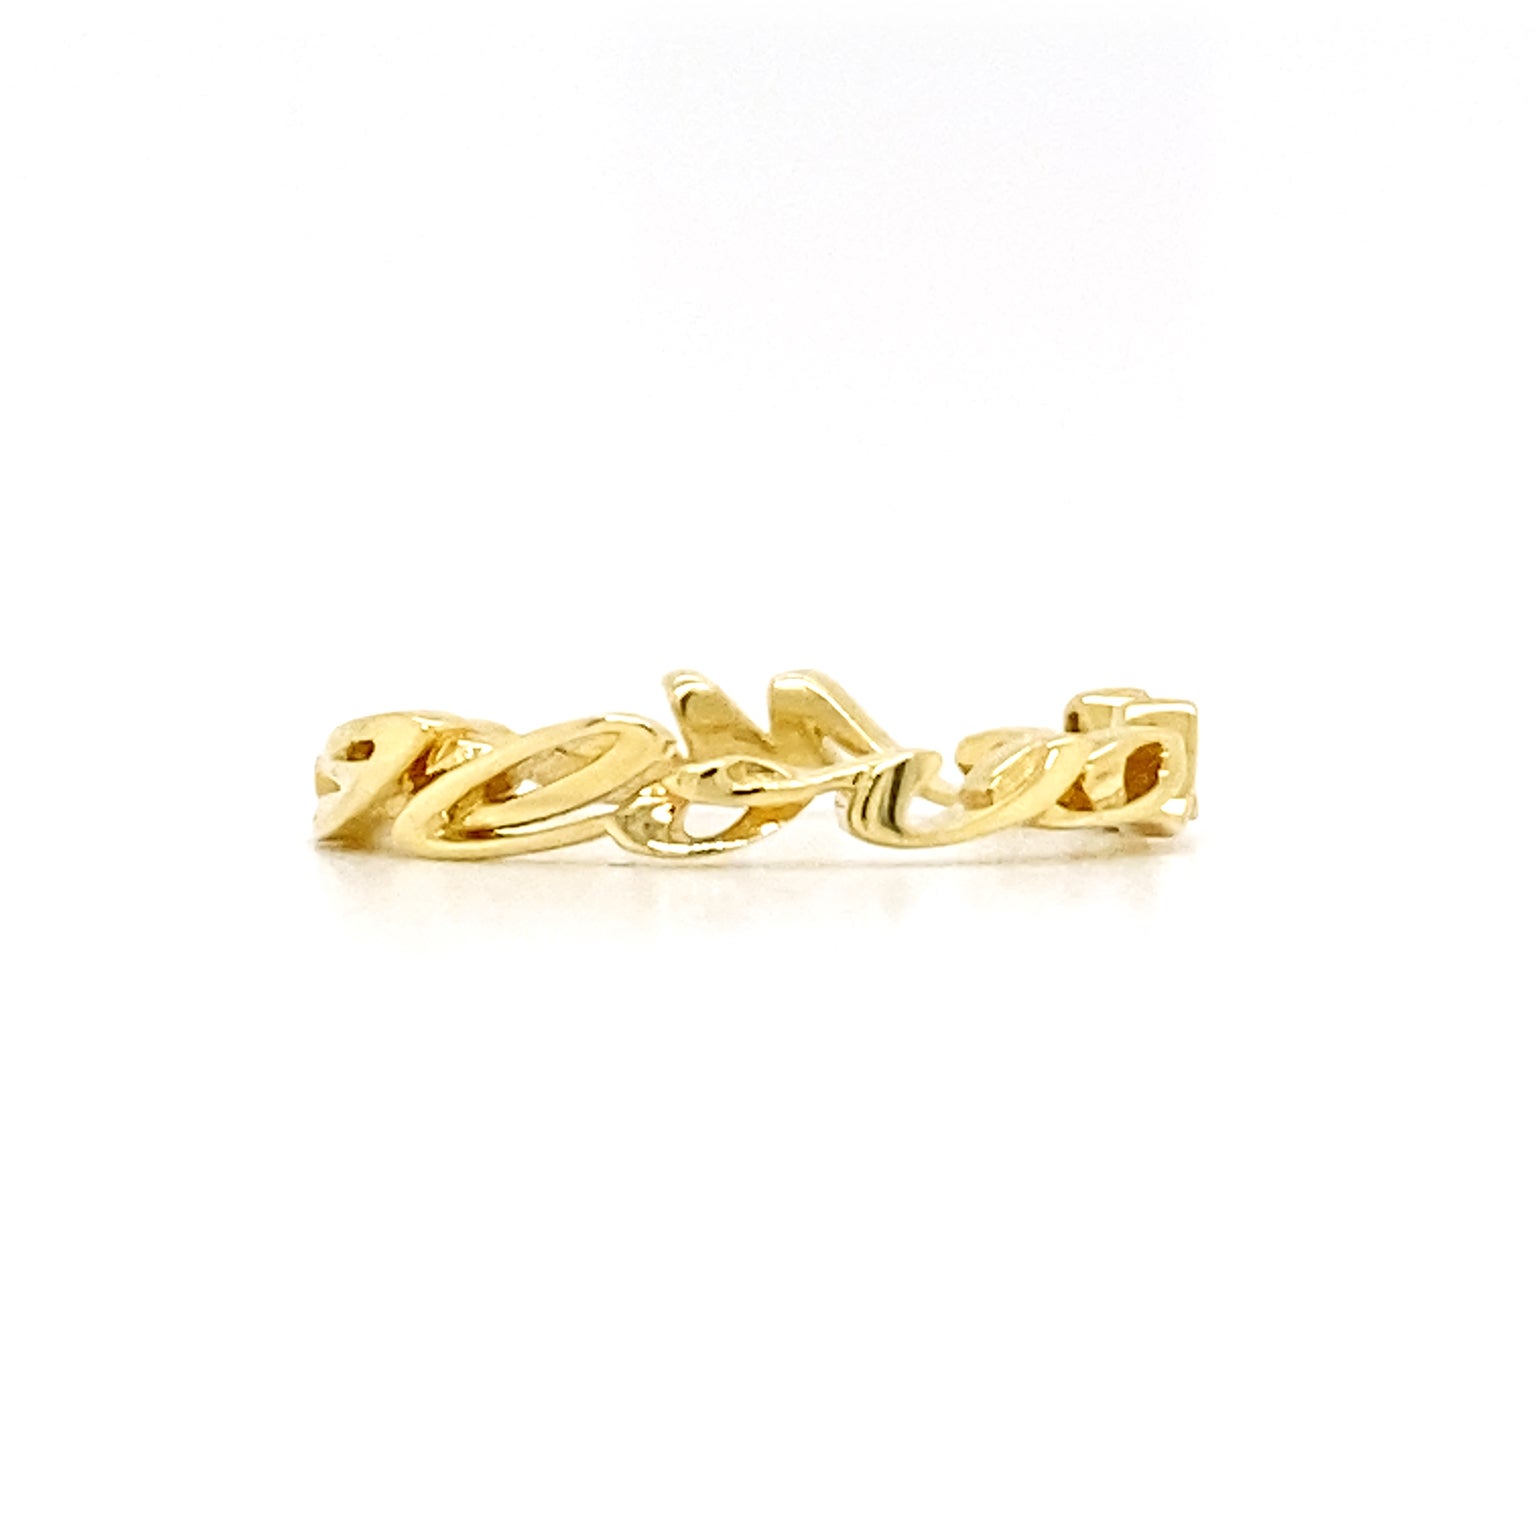 The dazzling 18k yellow gold script forms a personal message of assurance for this ring. Each letter is depicted with a dimension as it spells I Love Me More, encompassing the band. 18k yellow gold has a high caliber of malleability, which is